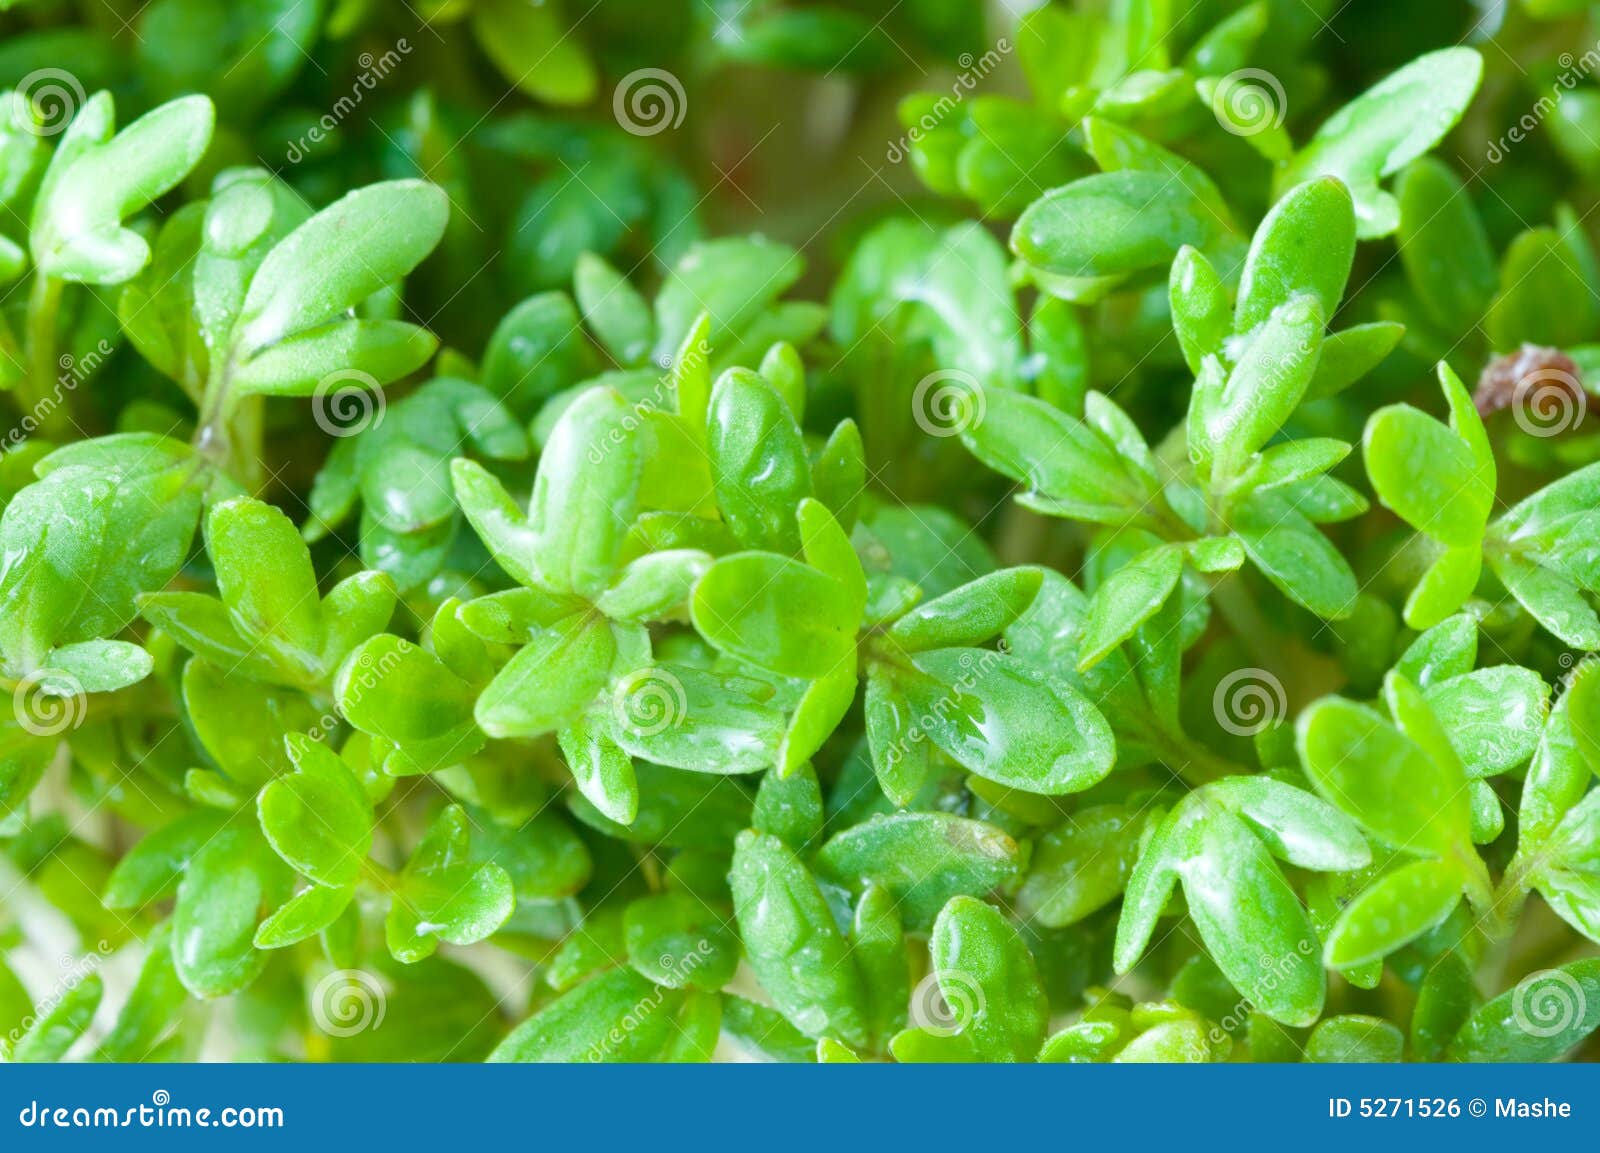 Garden cress stock photo. Image of cooking, aromatic, life - 5271526